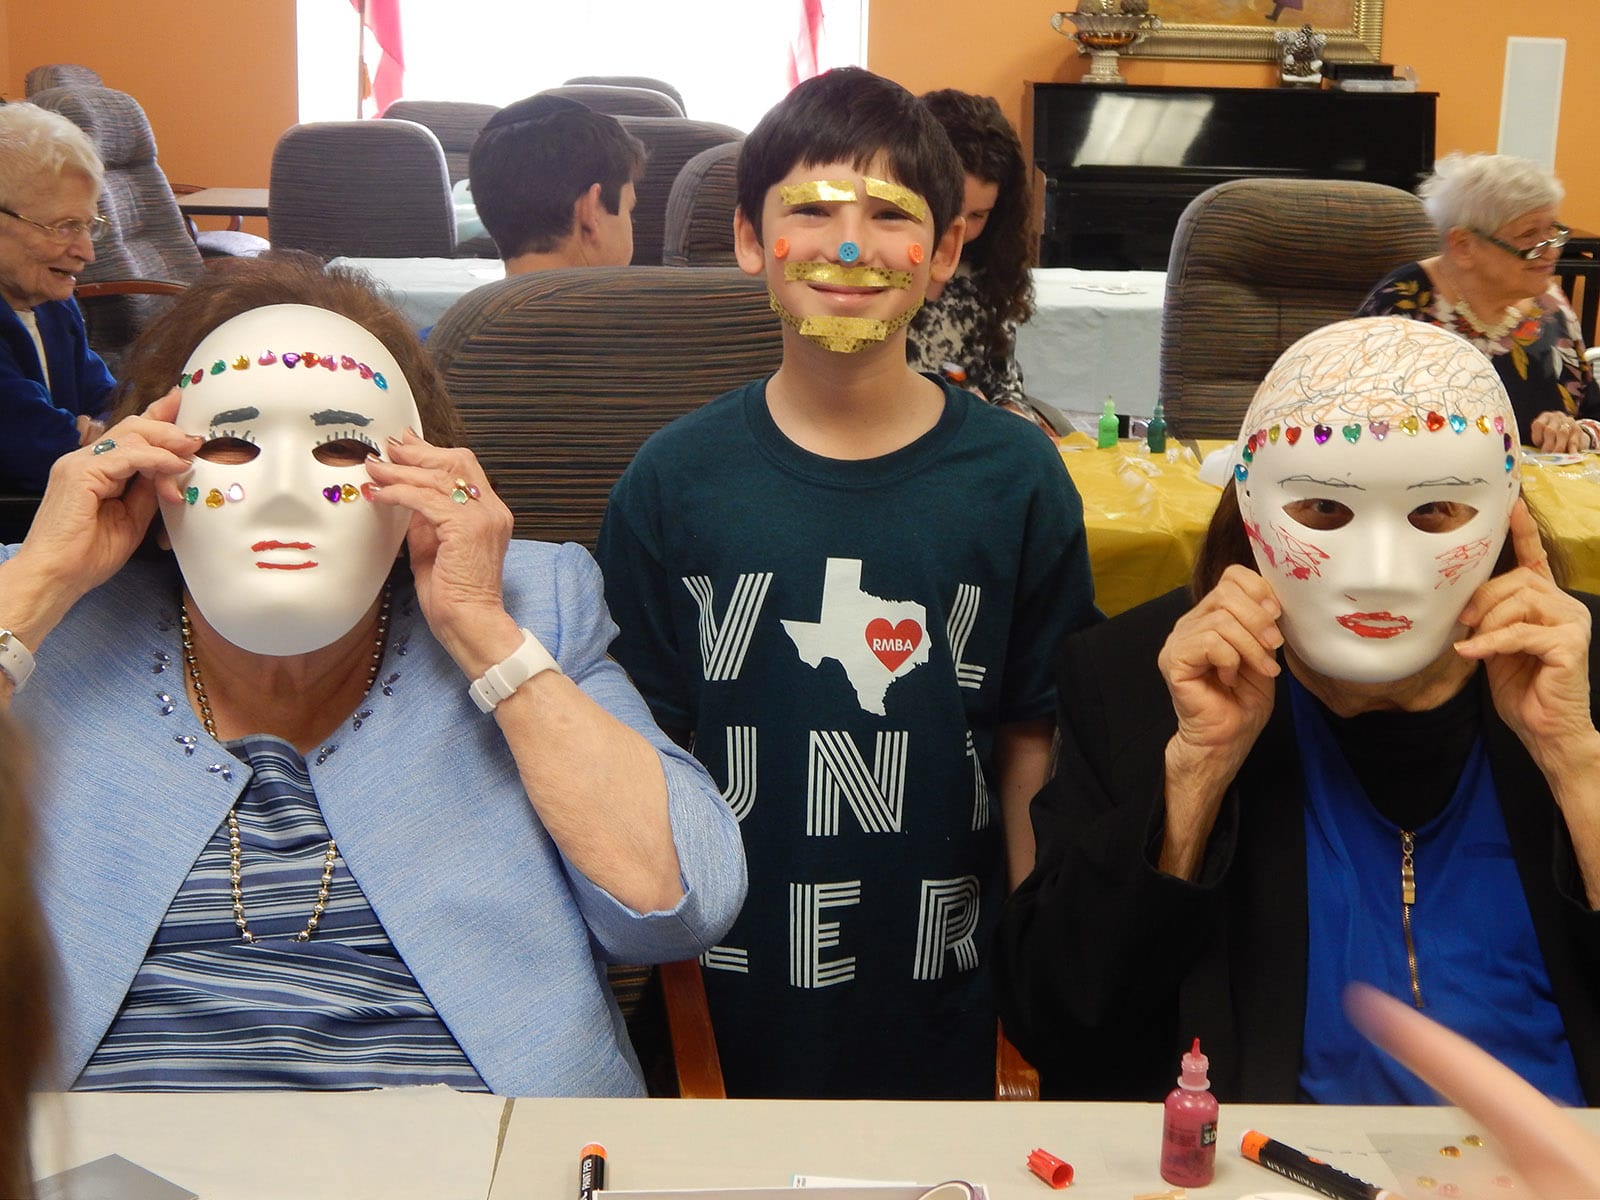 The Medallion residents are assisted by student in making masks for Purim